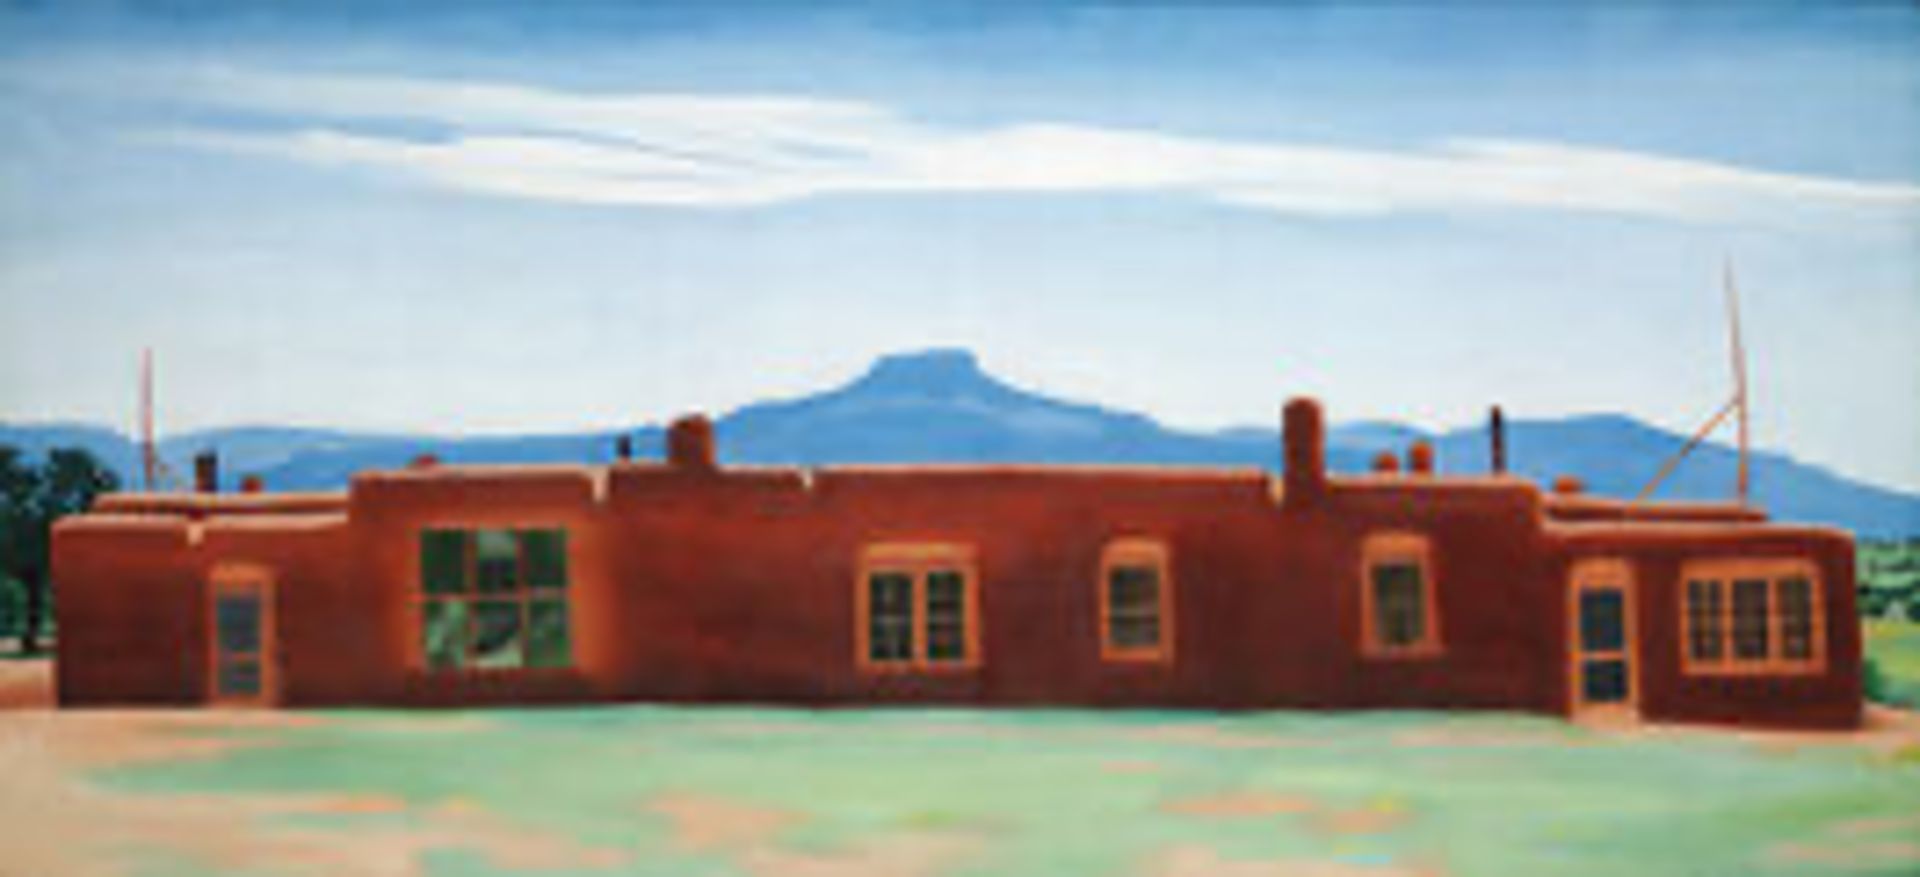 Georgia Okeeffe "The House I Live In" Offset LIthograph - Image 2 of 2